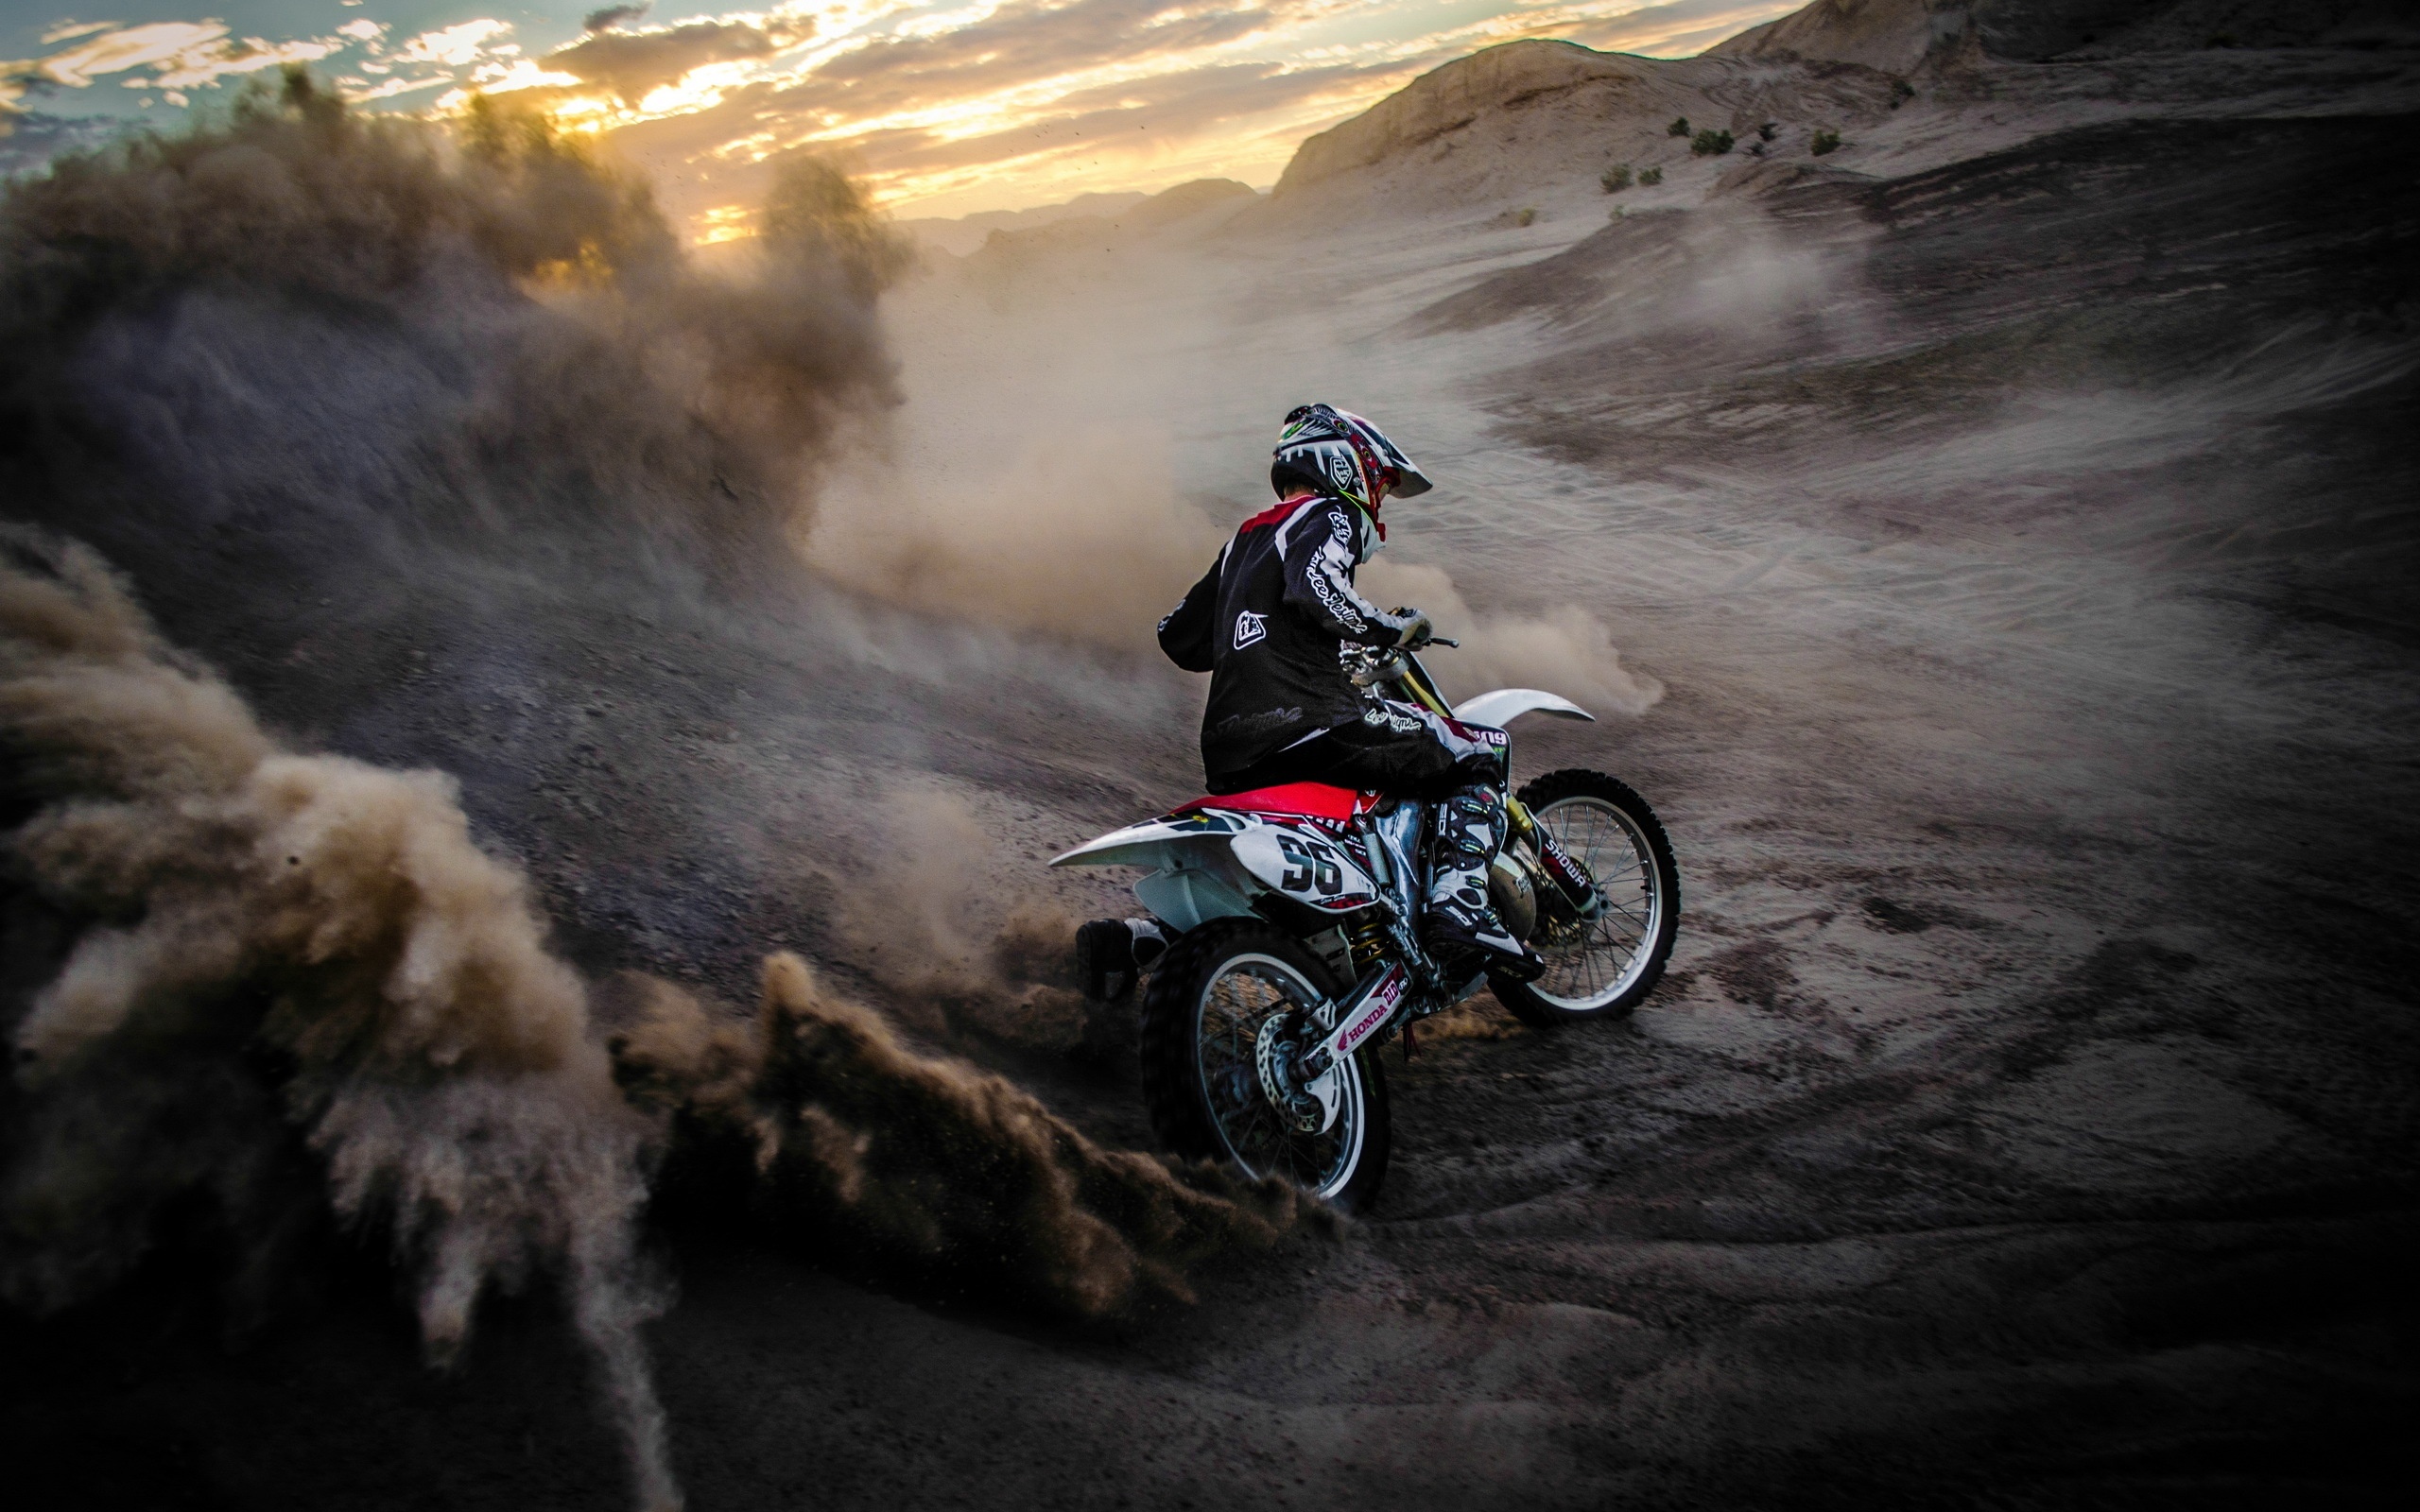 Motorcycle Racing: Crazy Motorcycle Off-road Race, Motocross Bikes, Most Powerful and Fastest Dirt Bikes. 2560x1600 HD Background.